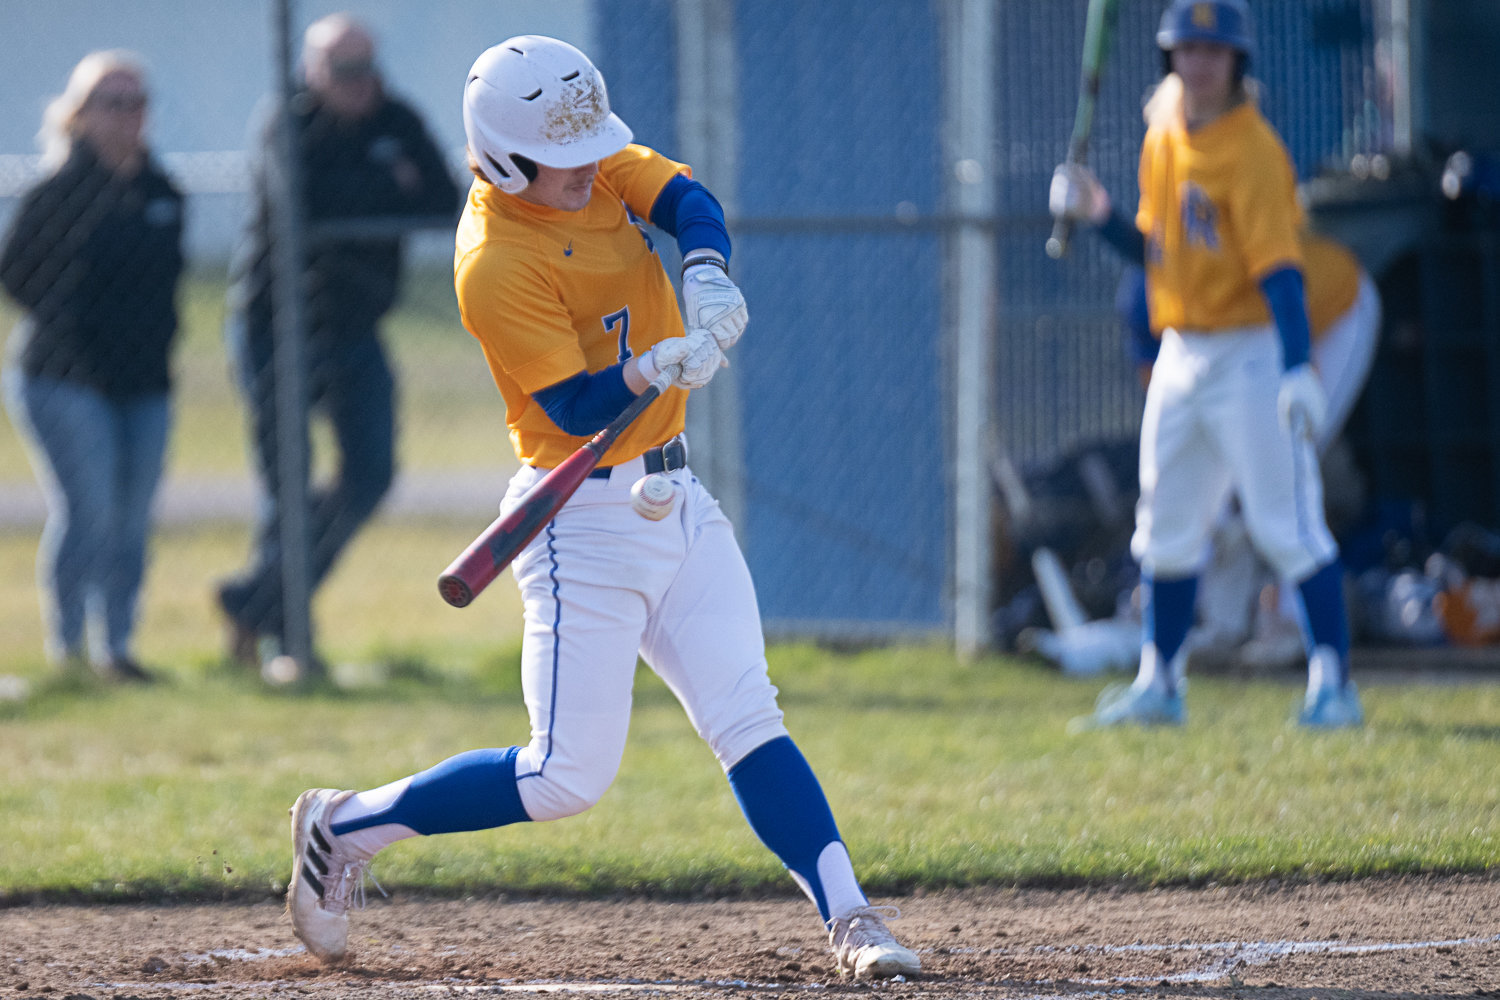 Braden Hartley hits a single in the bottom of the first inning of Rochester's 15-6 win over R.A. Long on March 16.